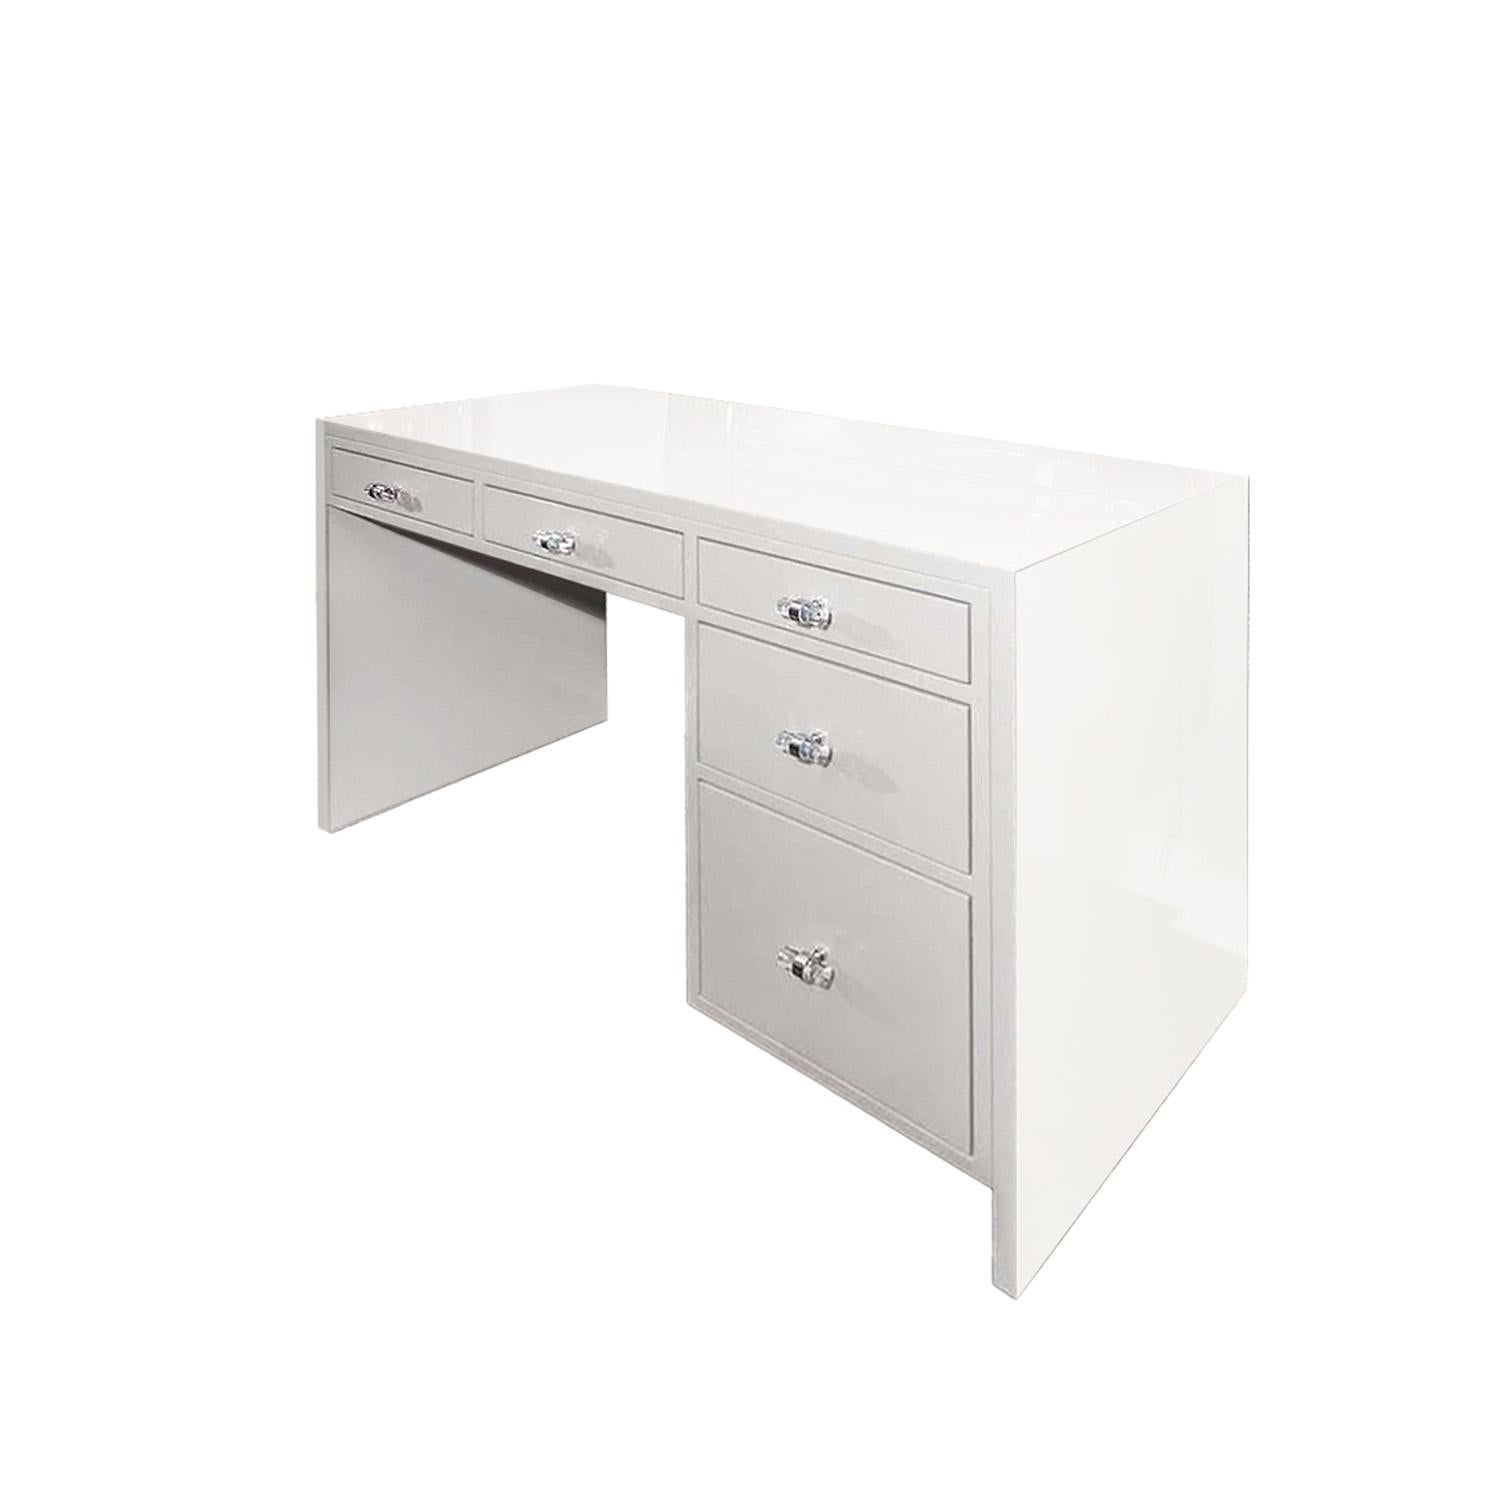 Custom, made to order 5-drawer lacquered desk with polished chrome & lucite pulls.